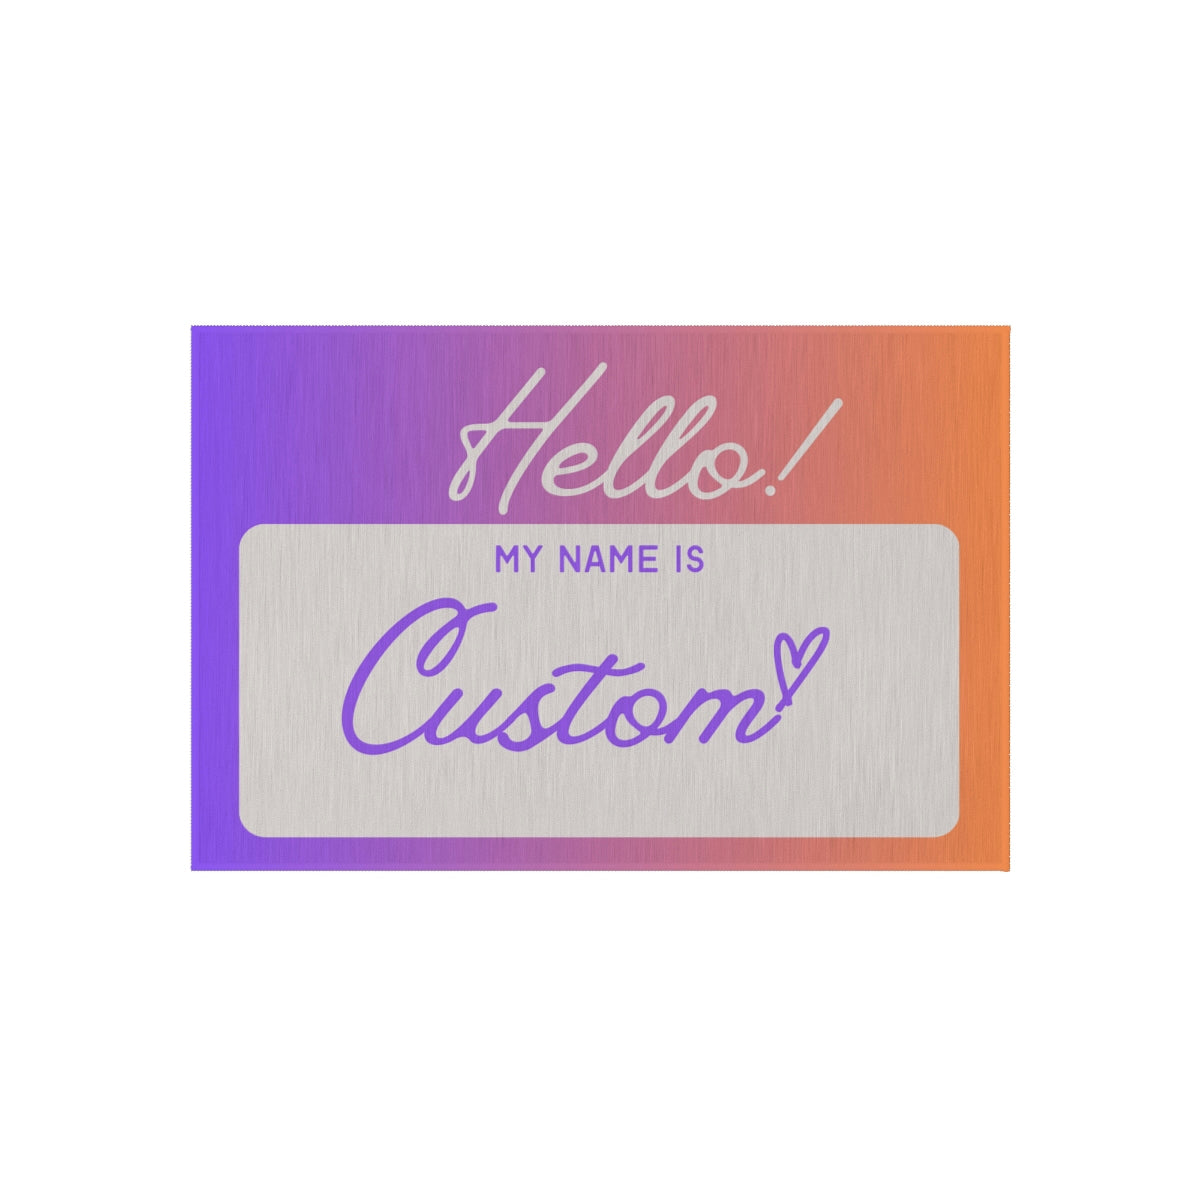 Hello My Name Is… Outdoor Rug - Custom for your Home, Campervan, RV, Vintage Trailer, Campsite, Glamping